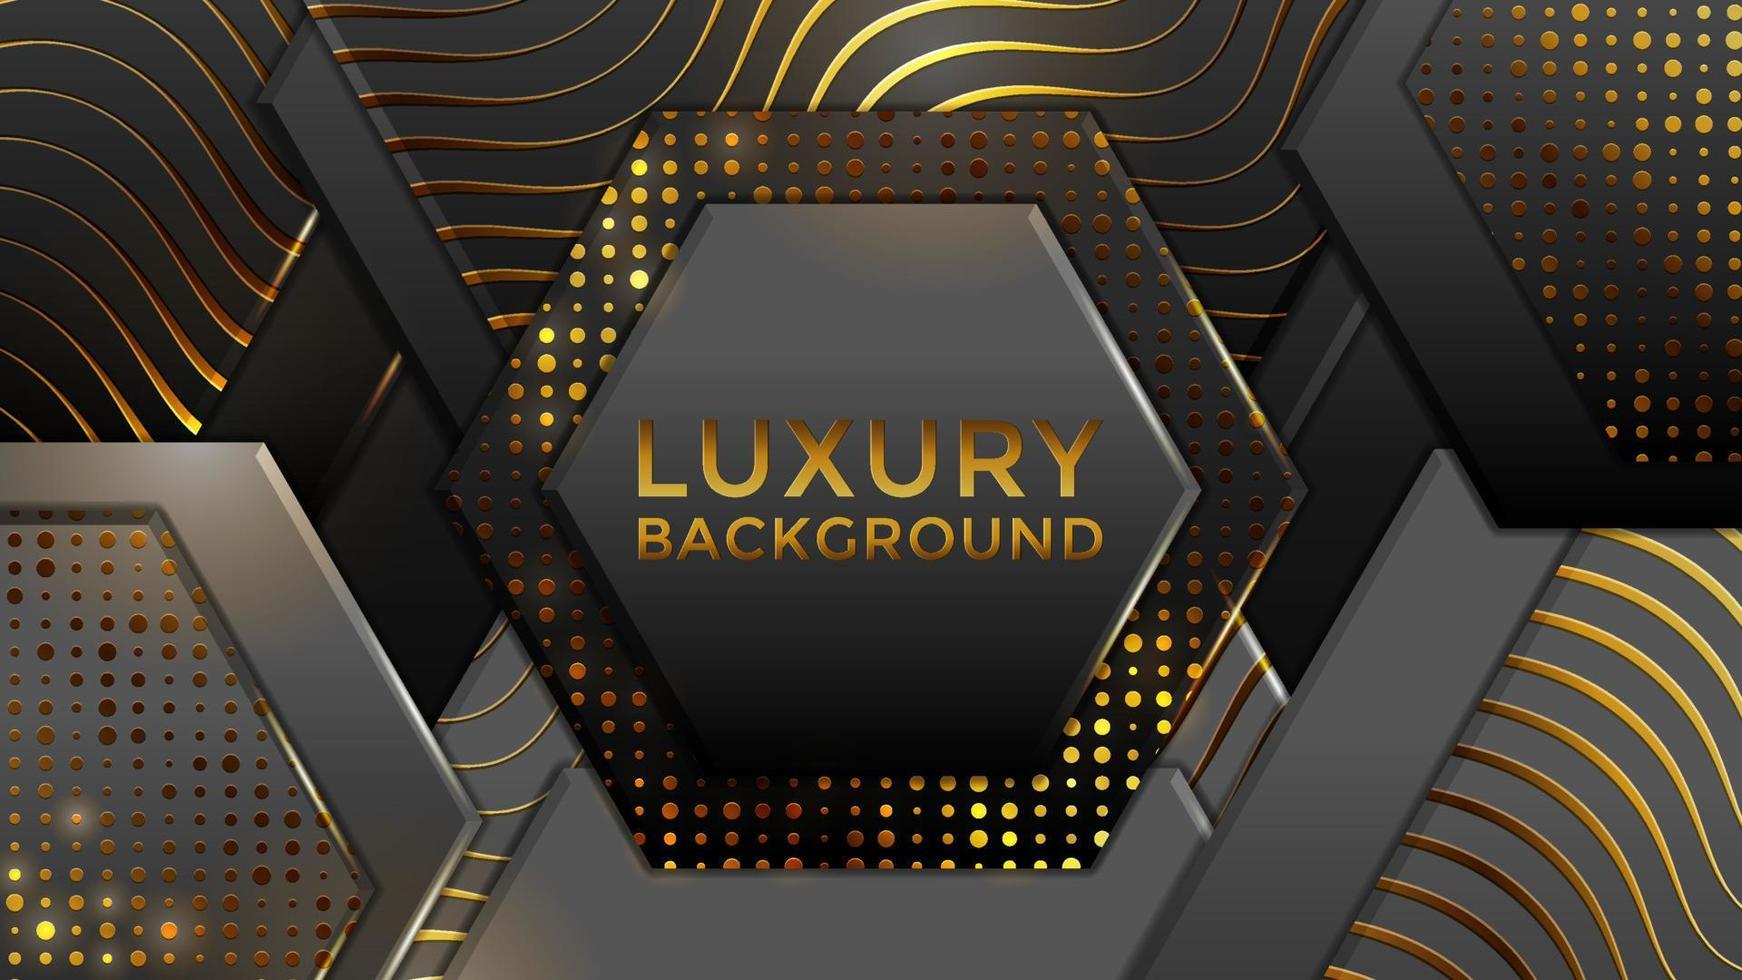 Luxury background. Abstract realistic papercut decoration textured with hexagon, circle, wavy zigzag shapes and golden halftone pattern. 3d backdrop. Vector illustration. Modern design